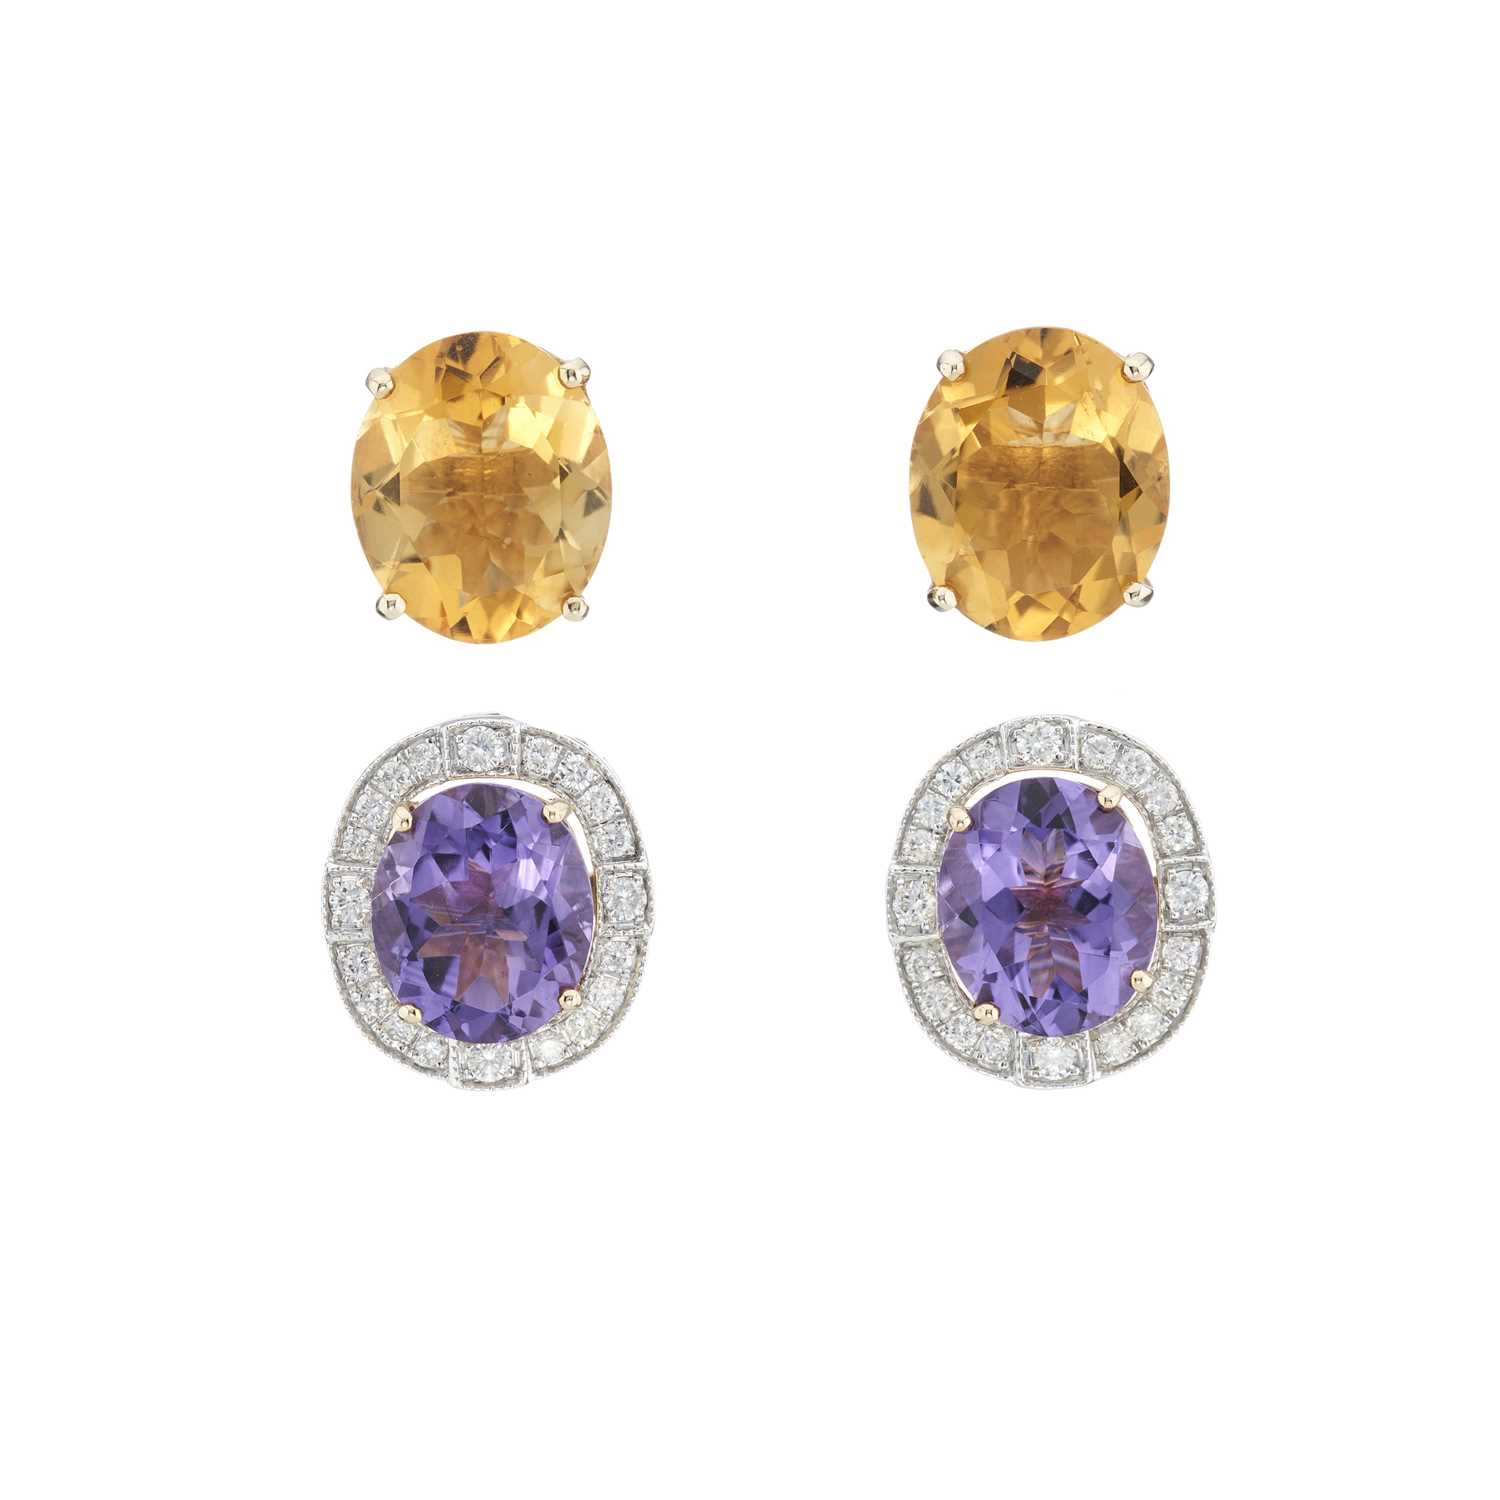 Lot 154 - A pair of gold amethyst, citrine and diamond cluster stud earrings